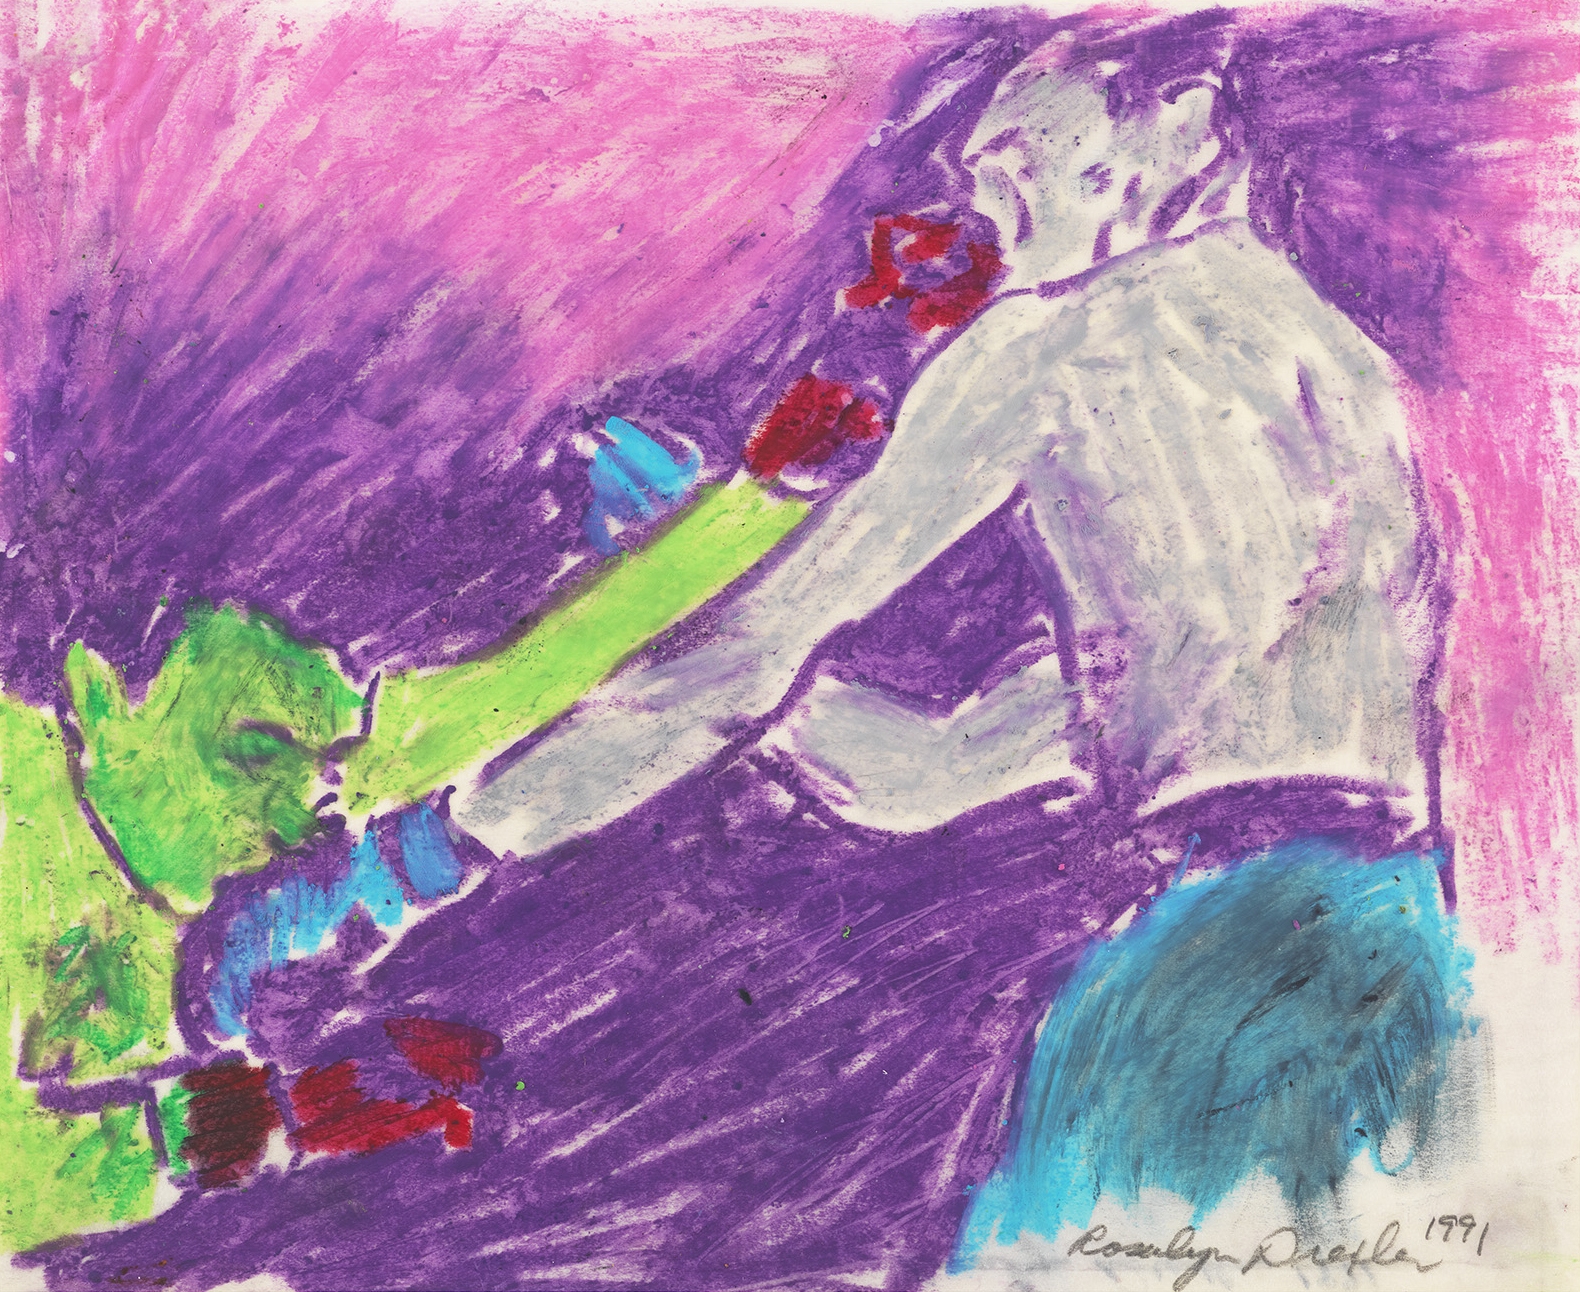 Going Down, 1991

Pastel and graphite on paper

7 3/4 x 9 1/4 inches